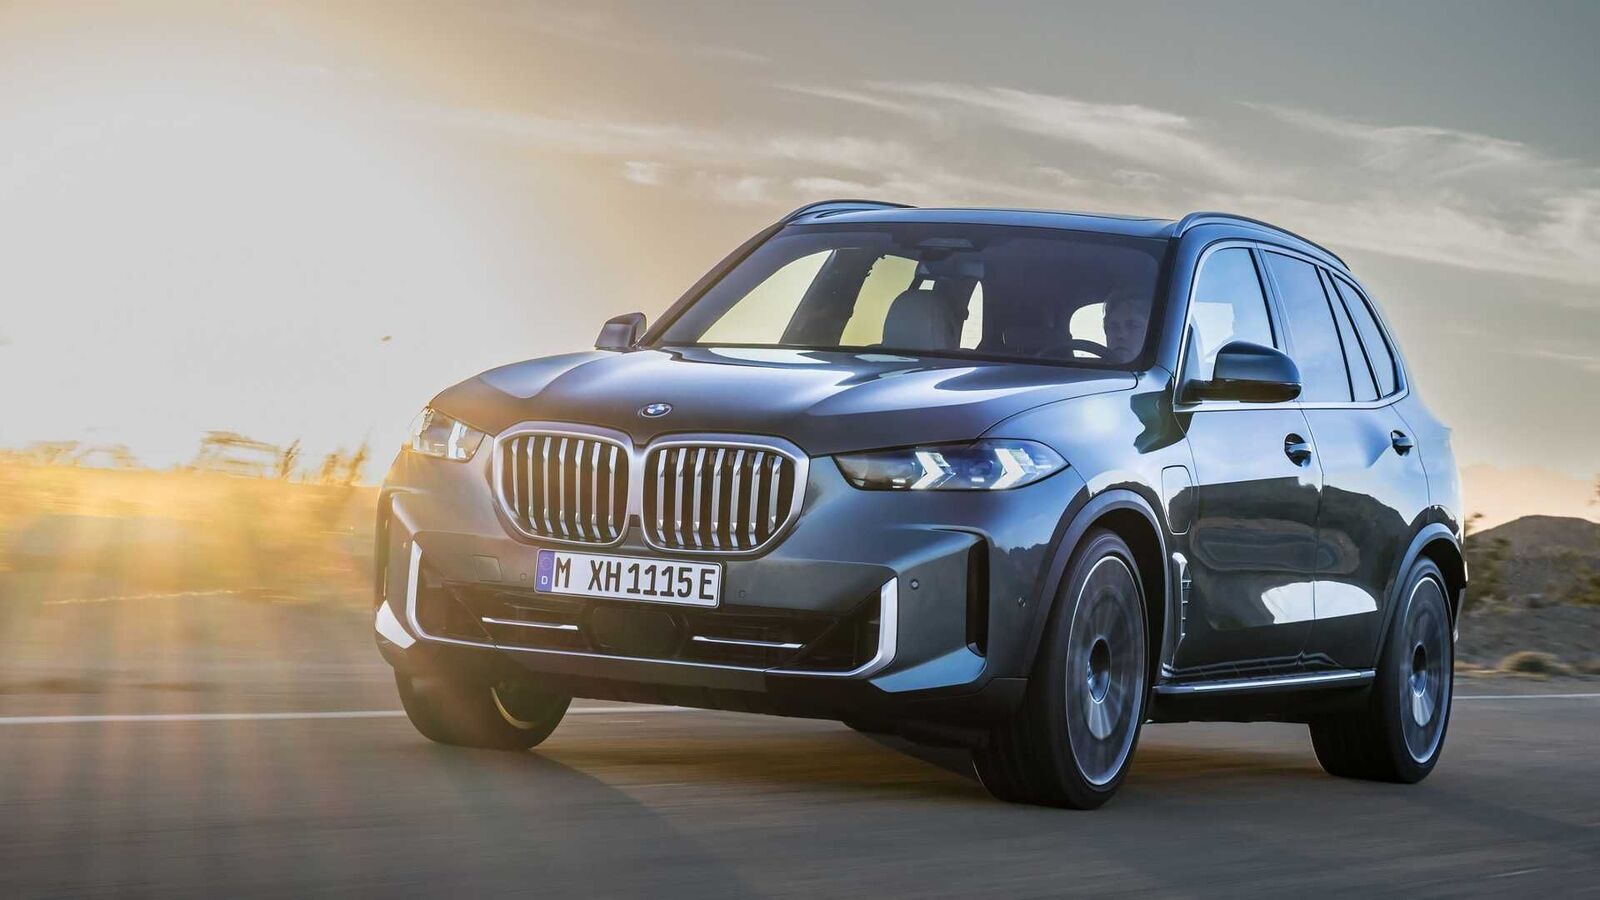 BMW X5 Facelift Launched in India; Design, Features, Prices and